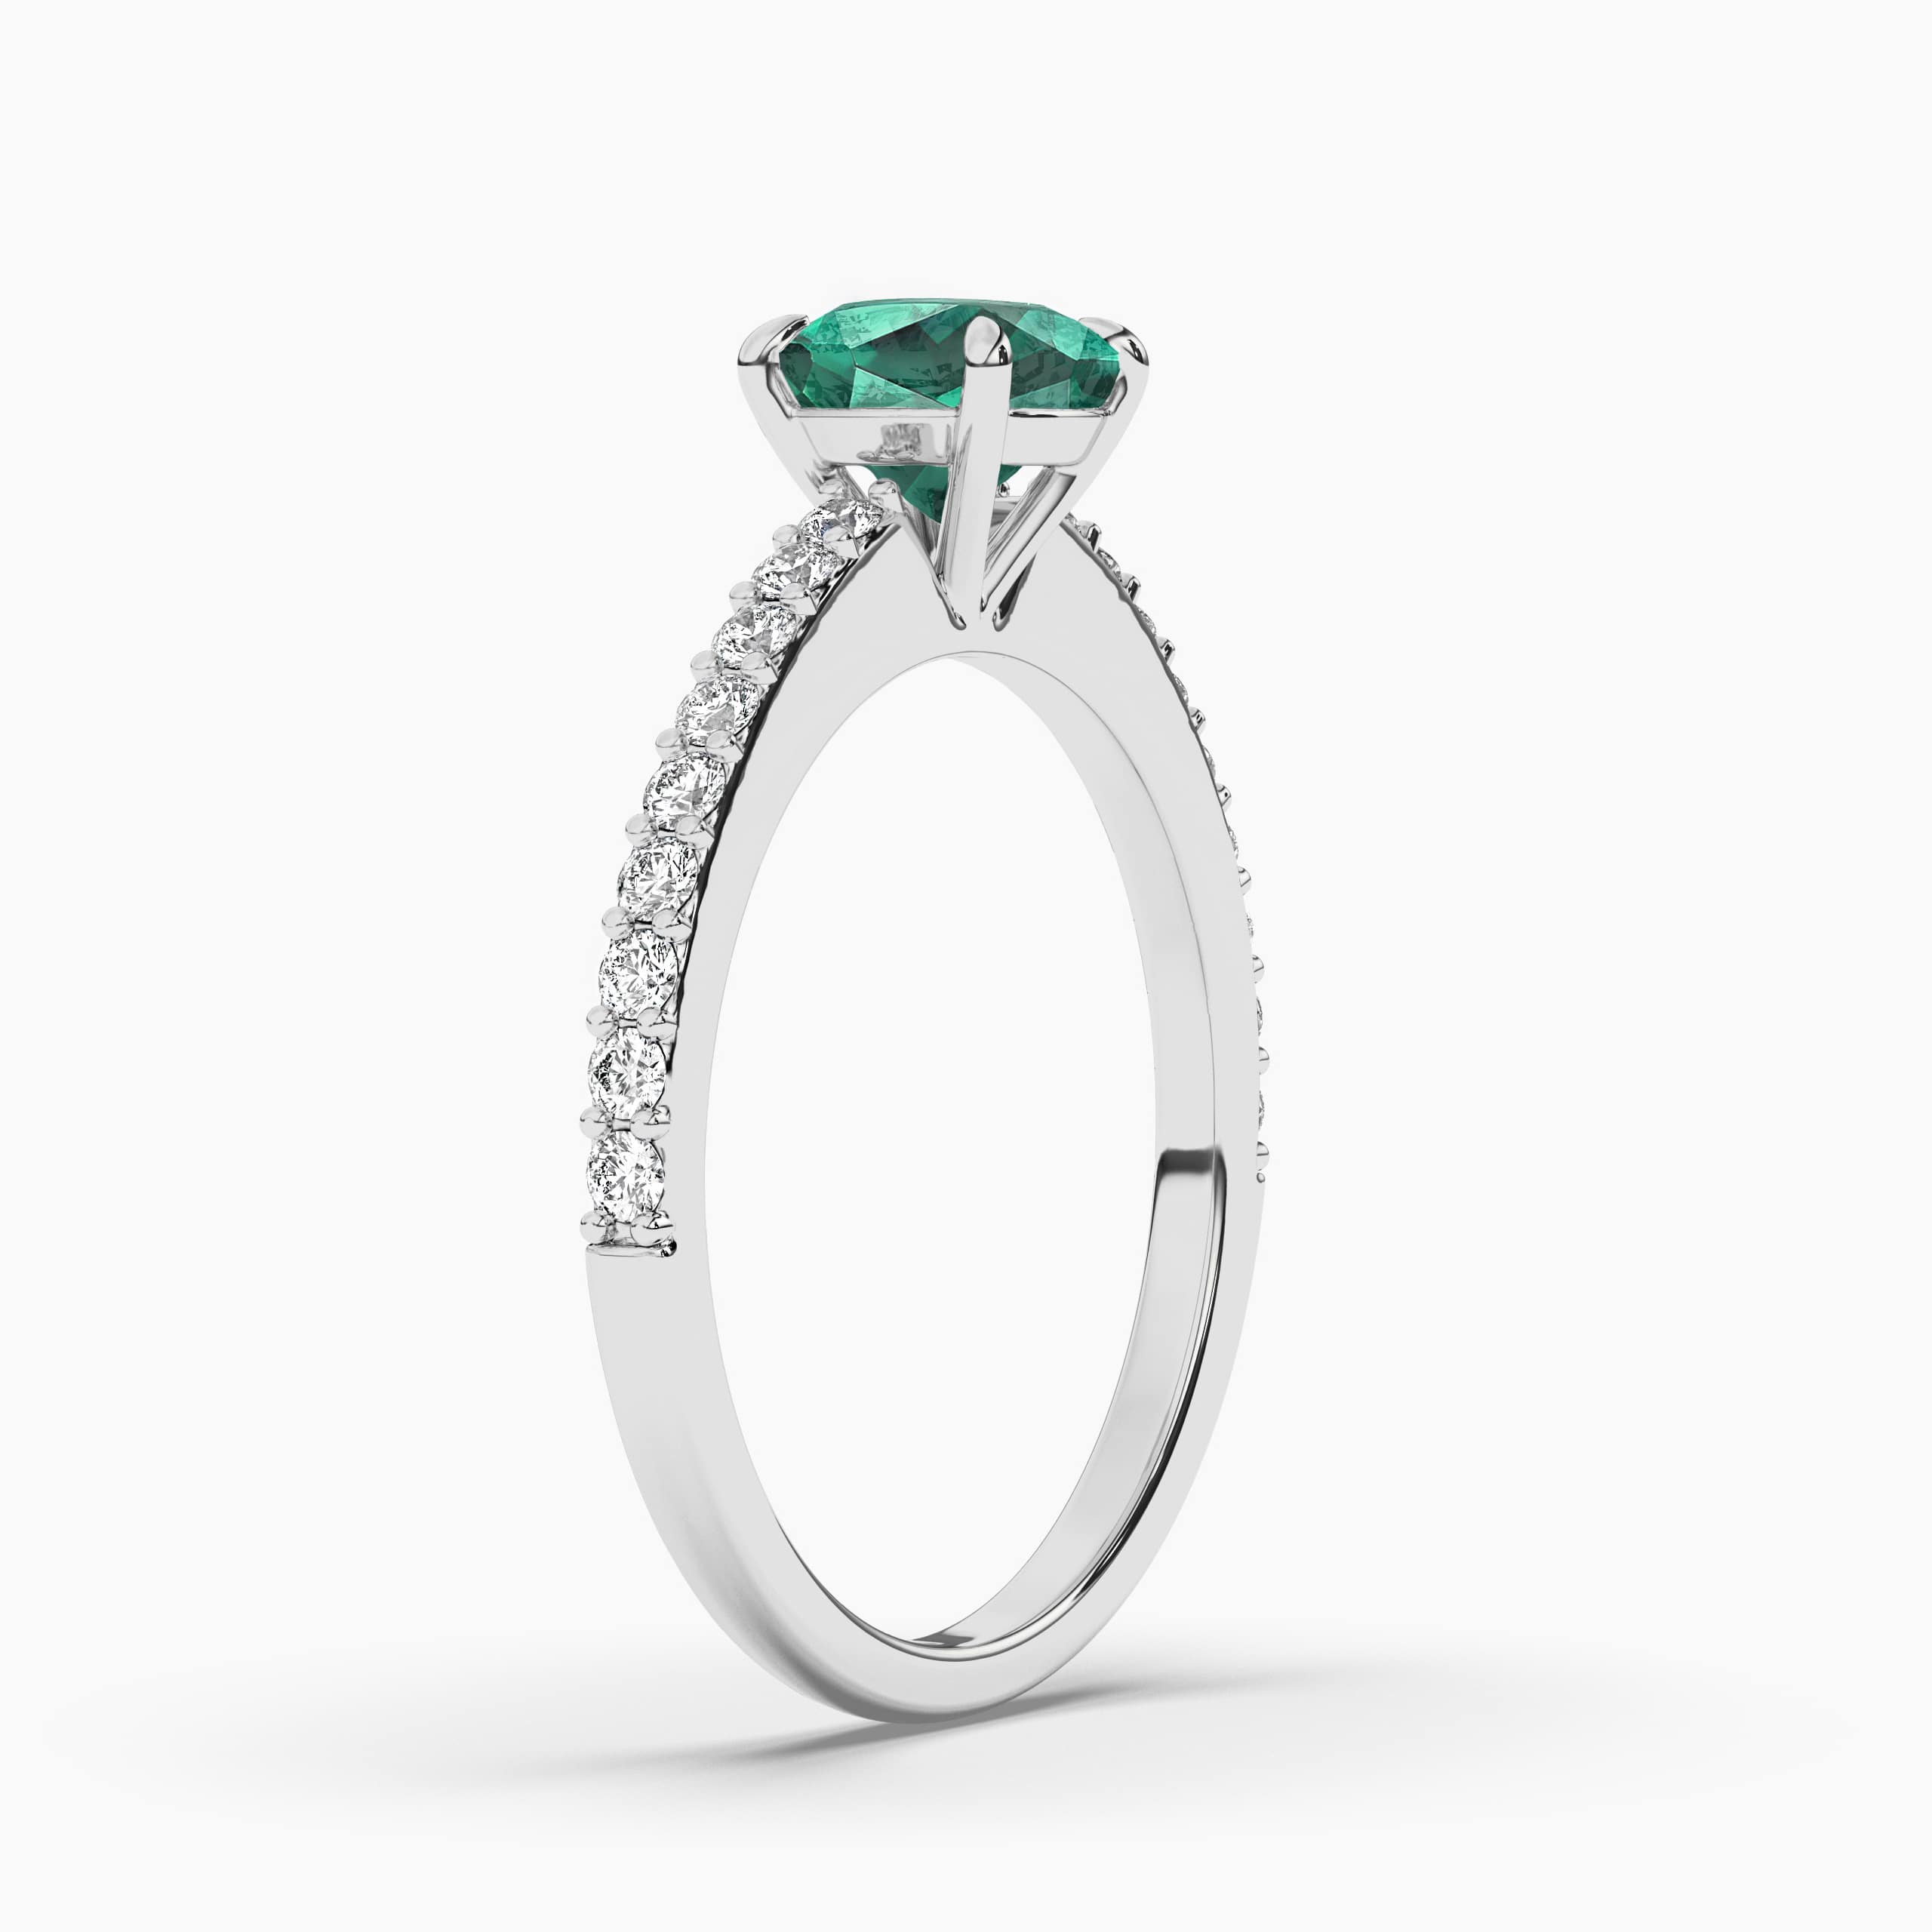 Cushion Cut Emerald and Diamond Engagement Ring in White Gold